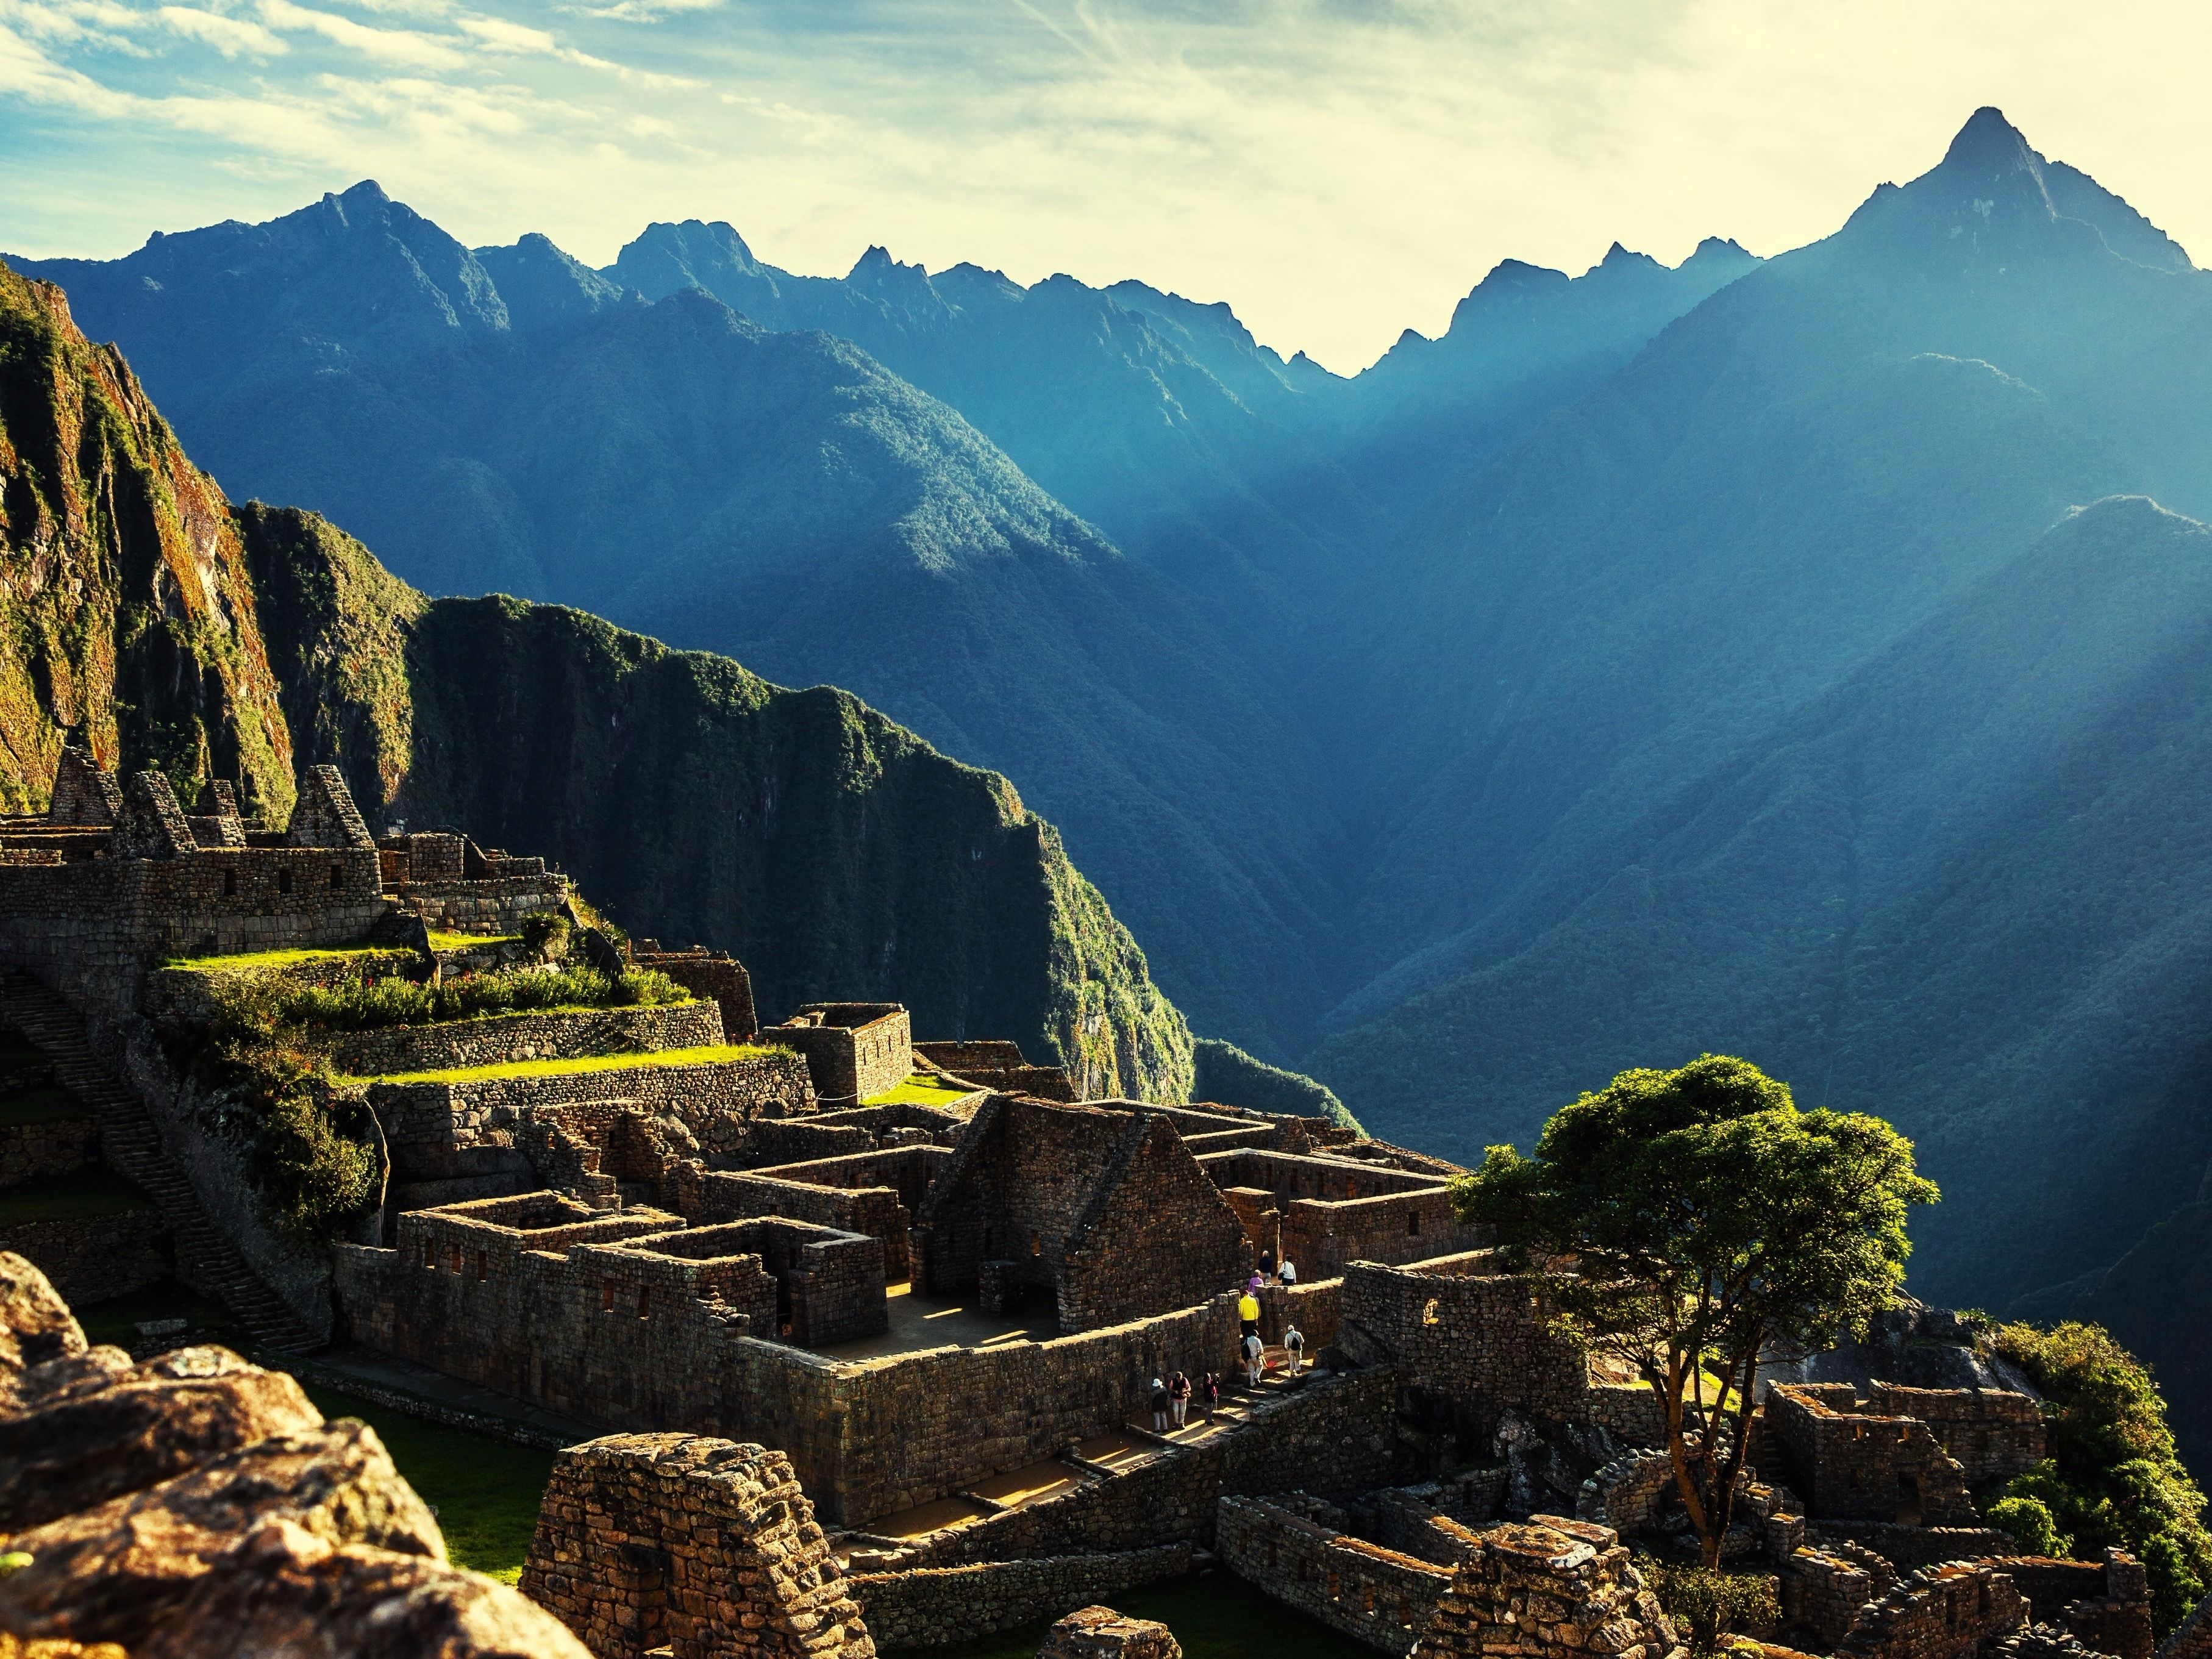 picture that will make you want to visit Machu Picchu